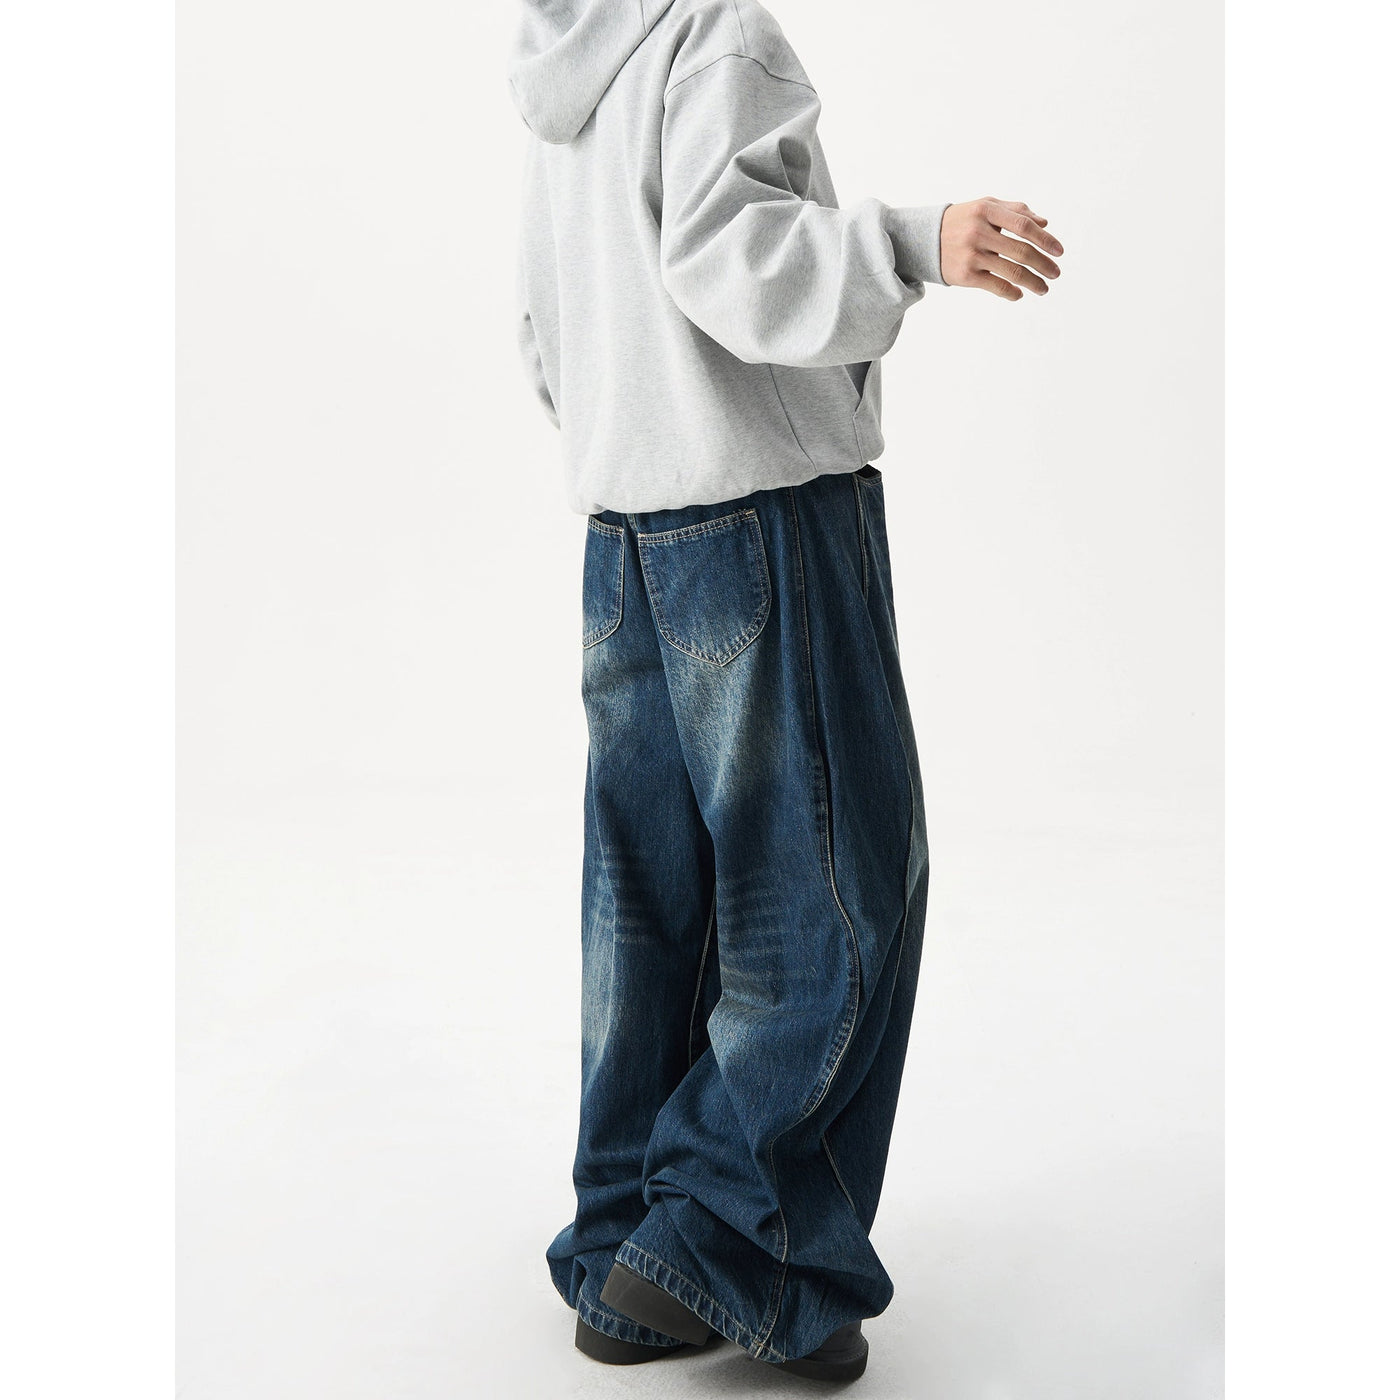 Washed Stitched Baggy Jeans Korean Street Fashion Jeans By MaxDstr Shop Online at OH Vault